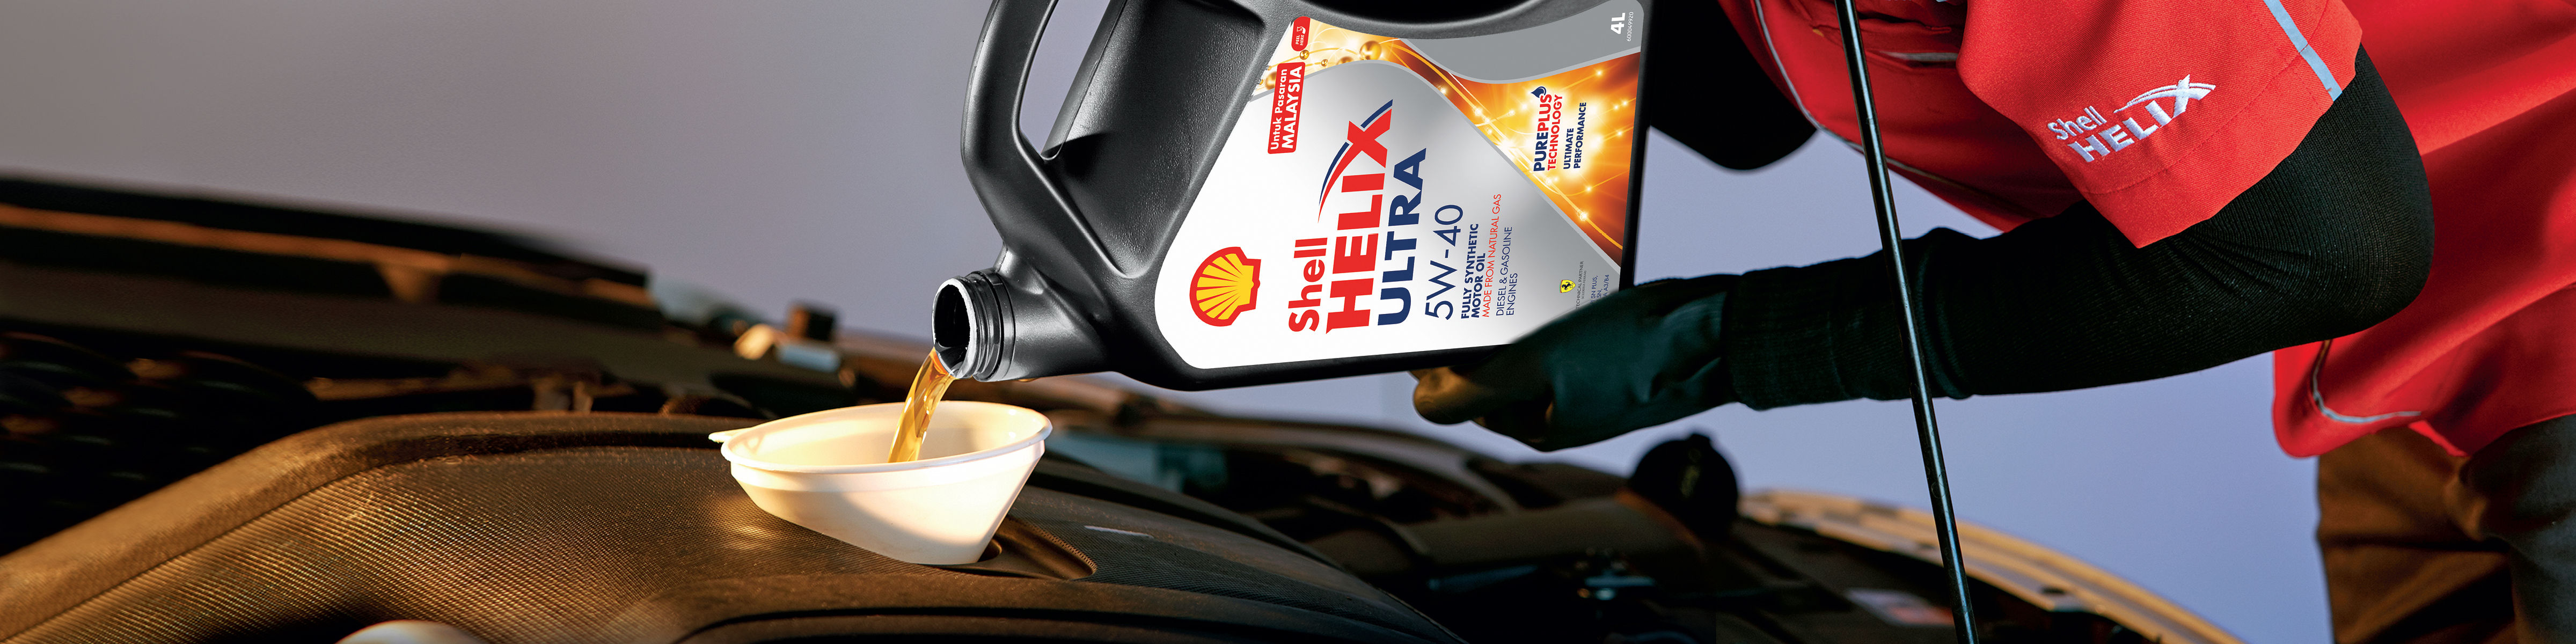 Designed for Ultimate Engine Performance - Shell HELIX Drive on